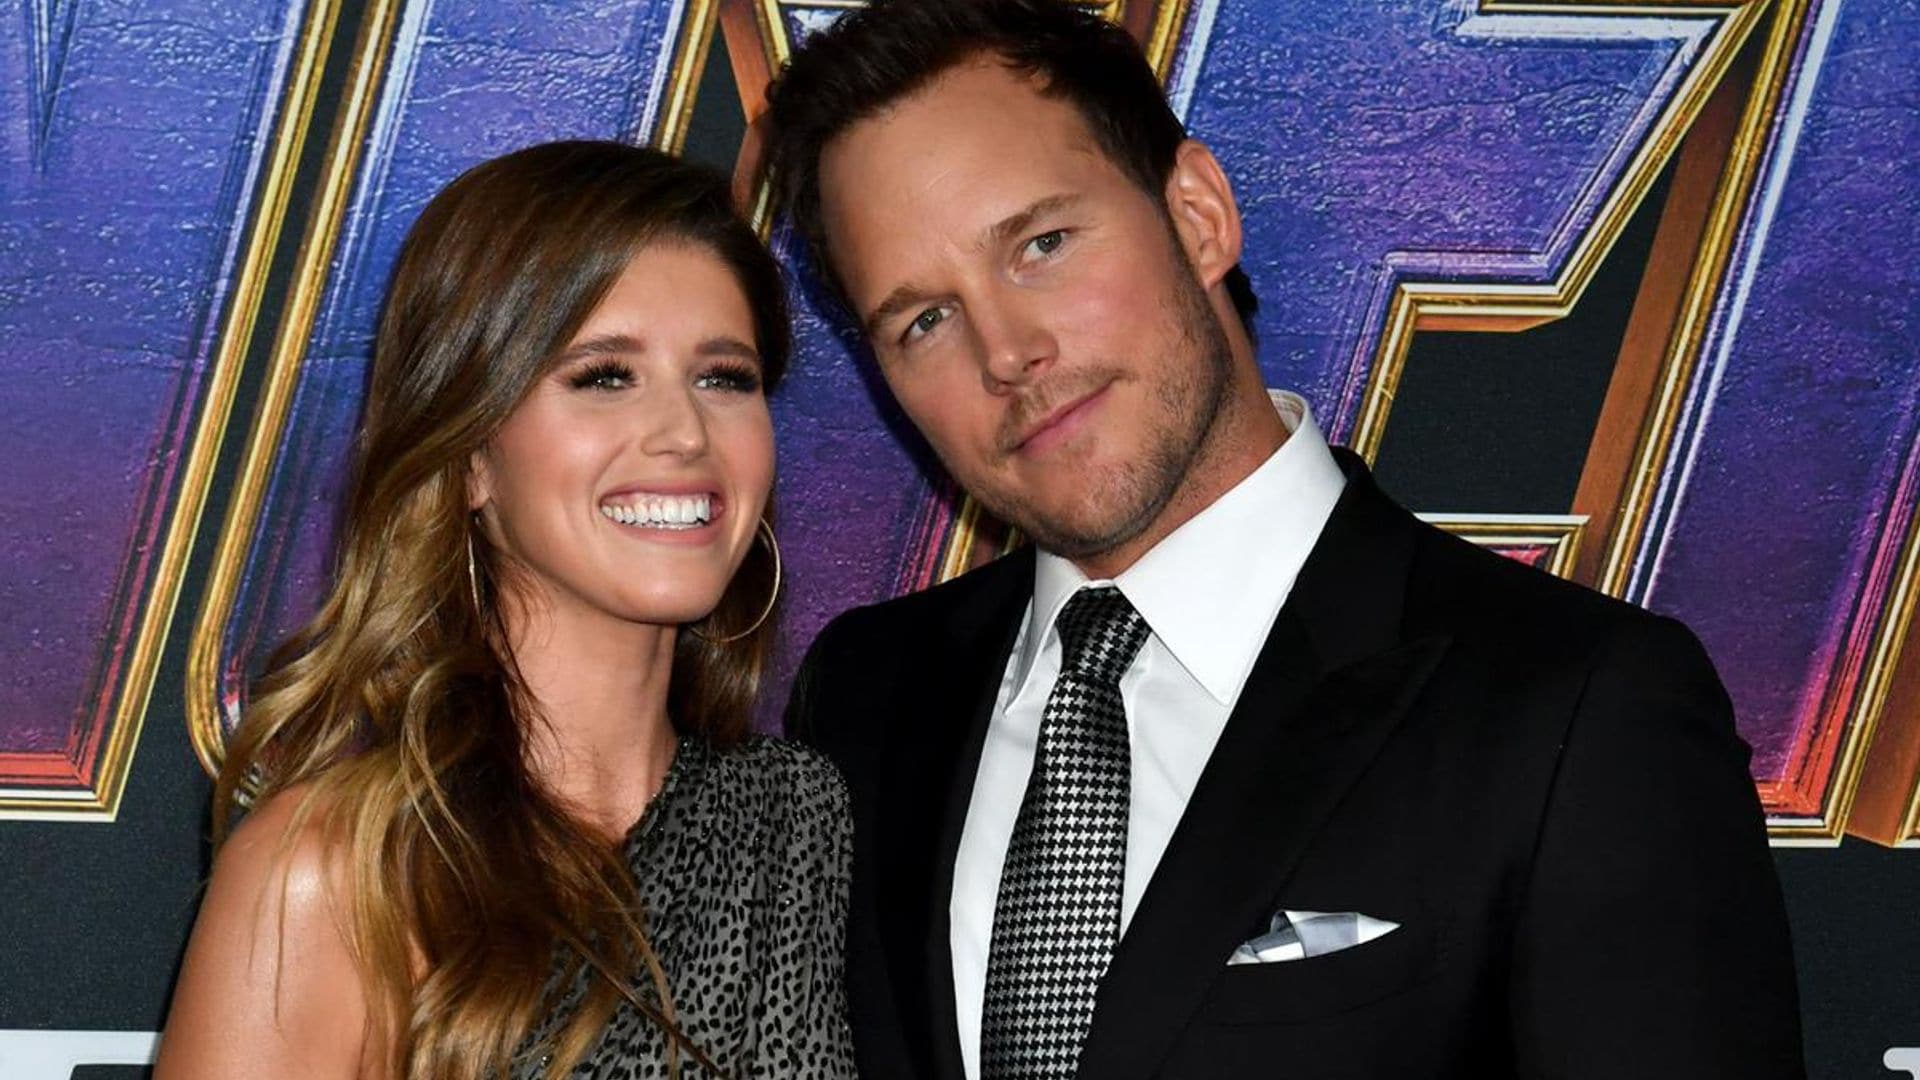 Katherine Schwarzenegger talks about the possibility of having more children in the future